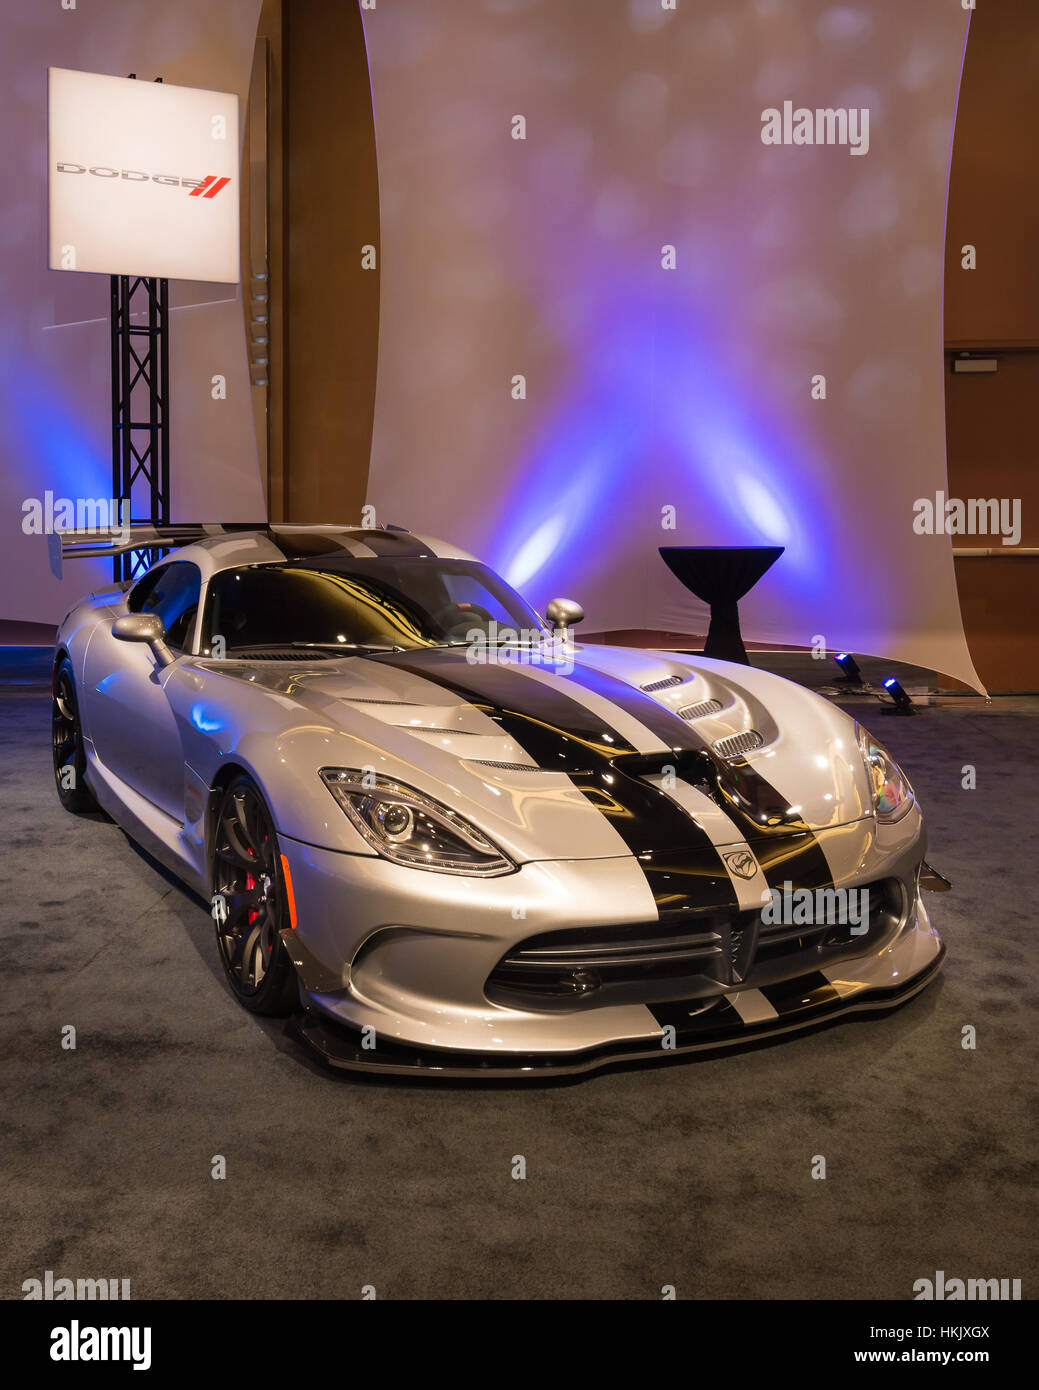 Detroit, MI, USA - January 10, 2016: A 2016 SRT (Dodge) Viper at The Gallery, an event sponsored by the North American International Auto Show (NAIAS) Stock Photo